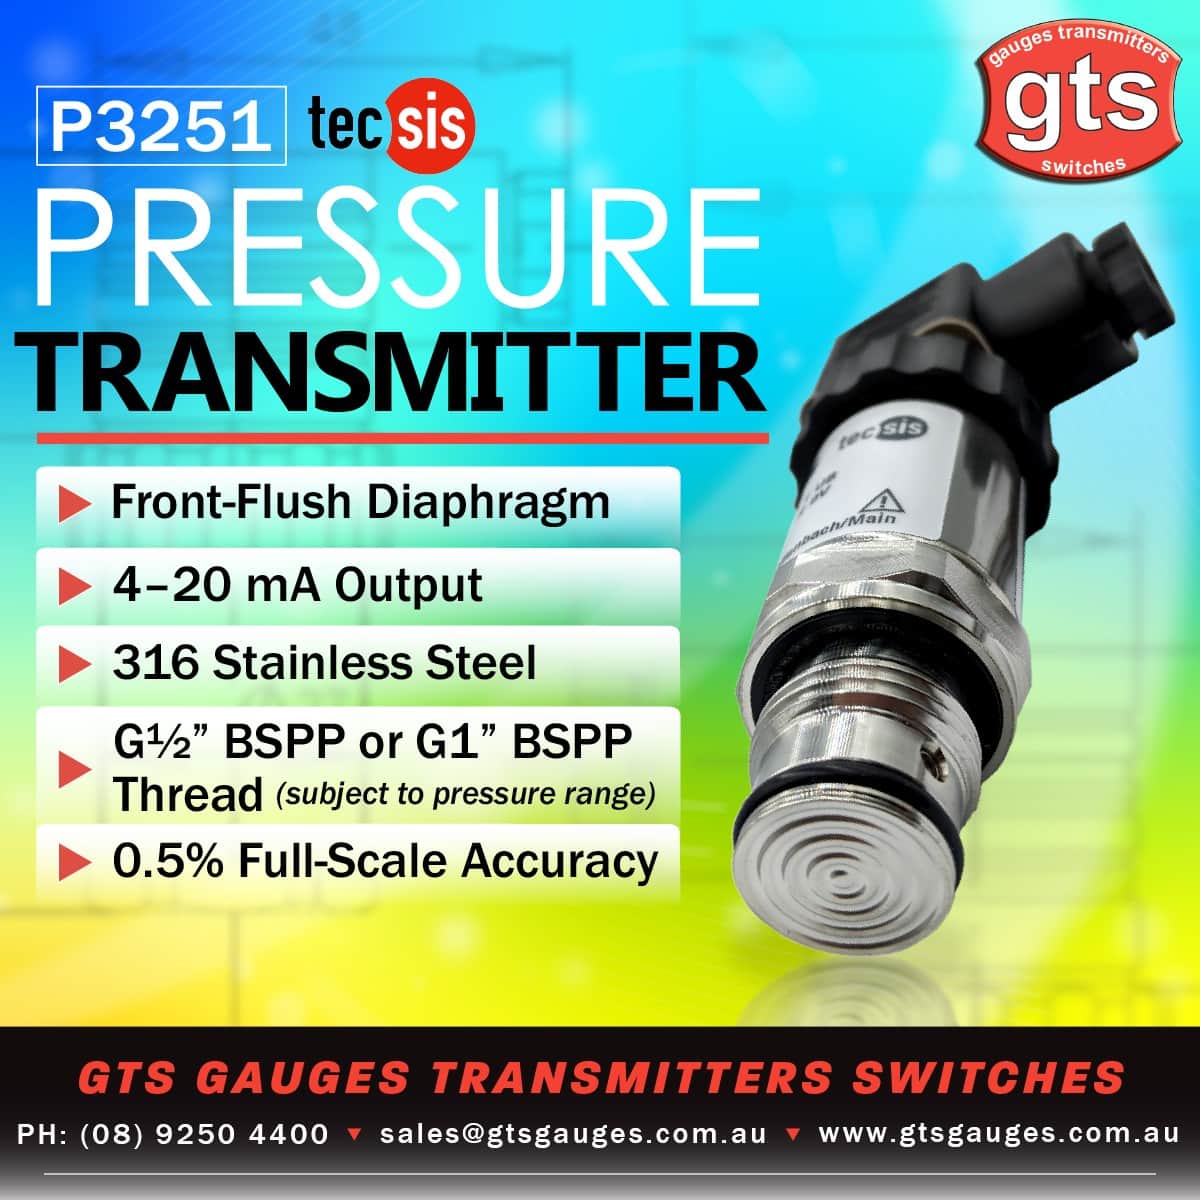 P3251 Pressure Transmitter with Front-Flush Diaphragm